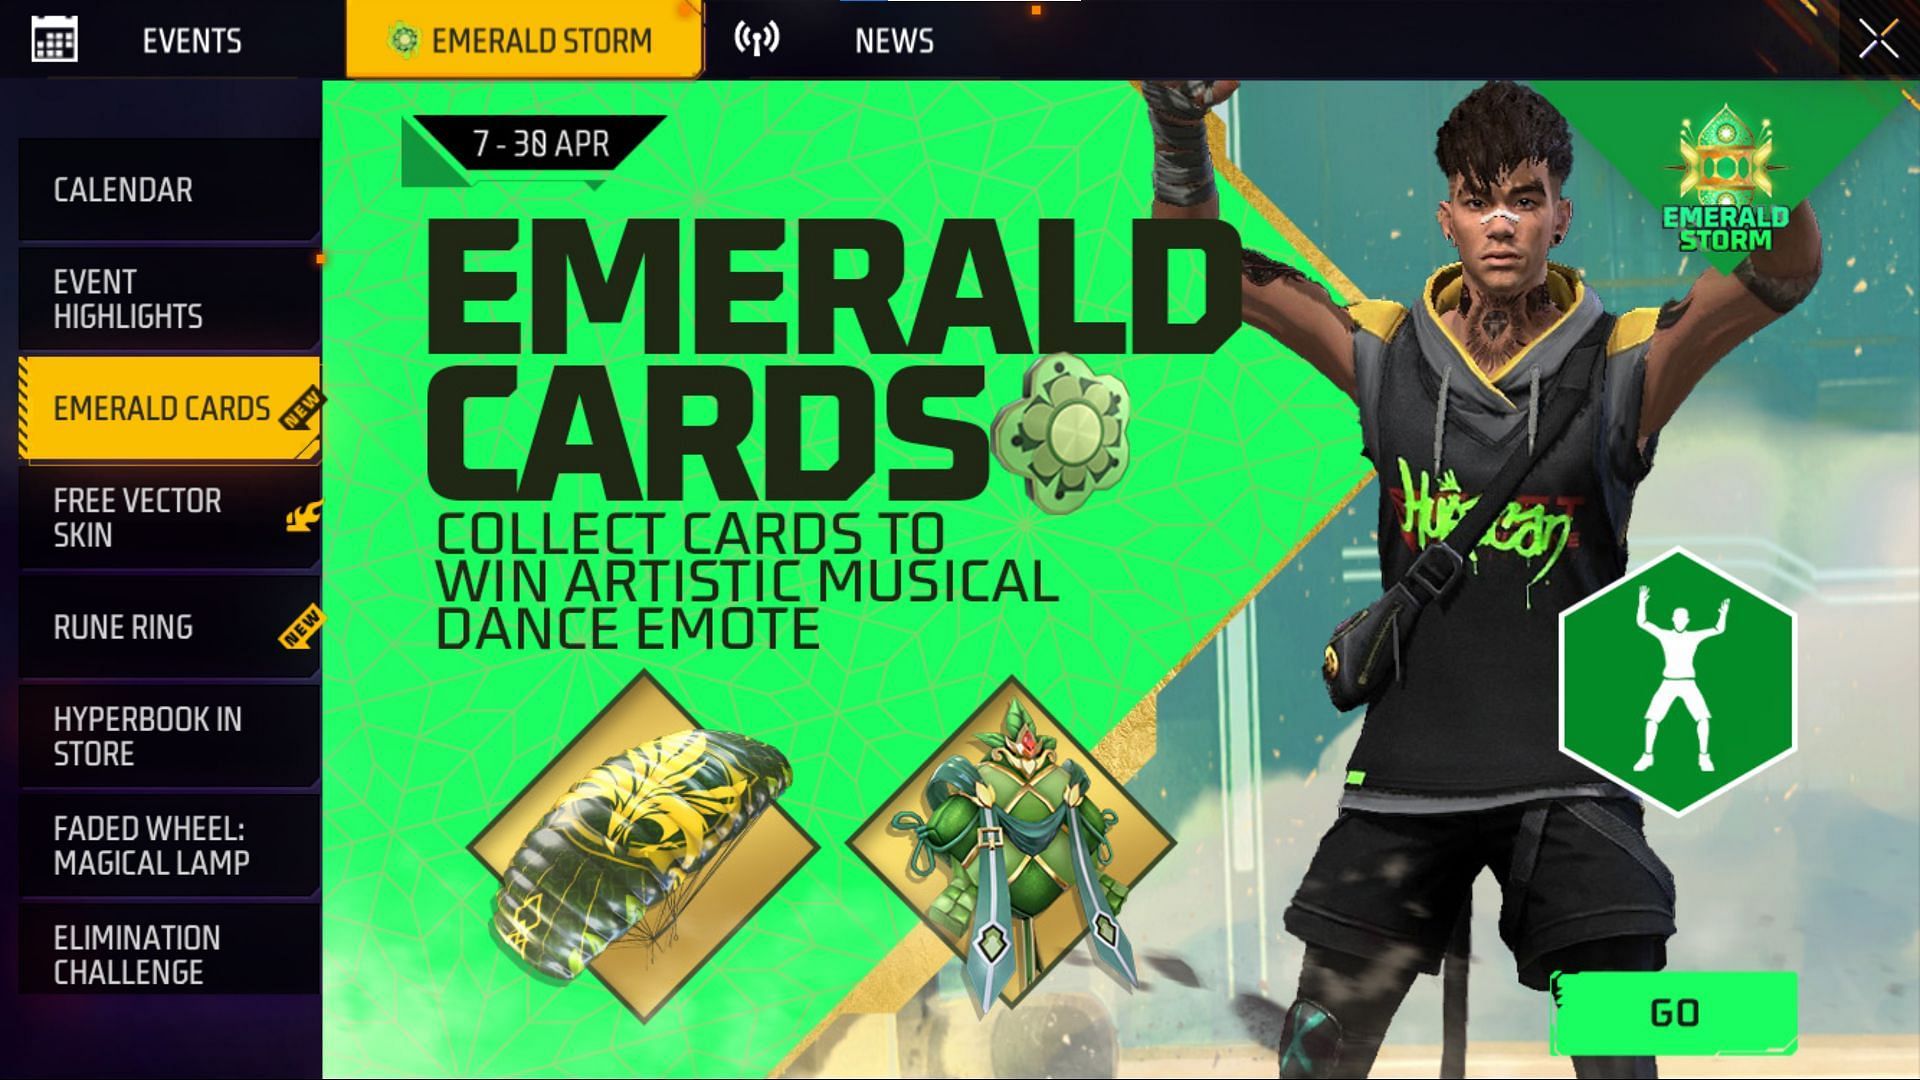 Emerald Cards is one of the ongoing events (Image via Garena)